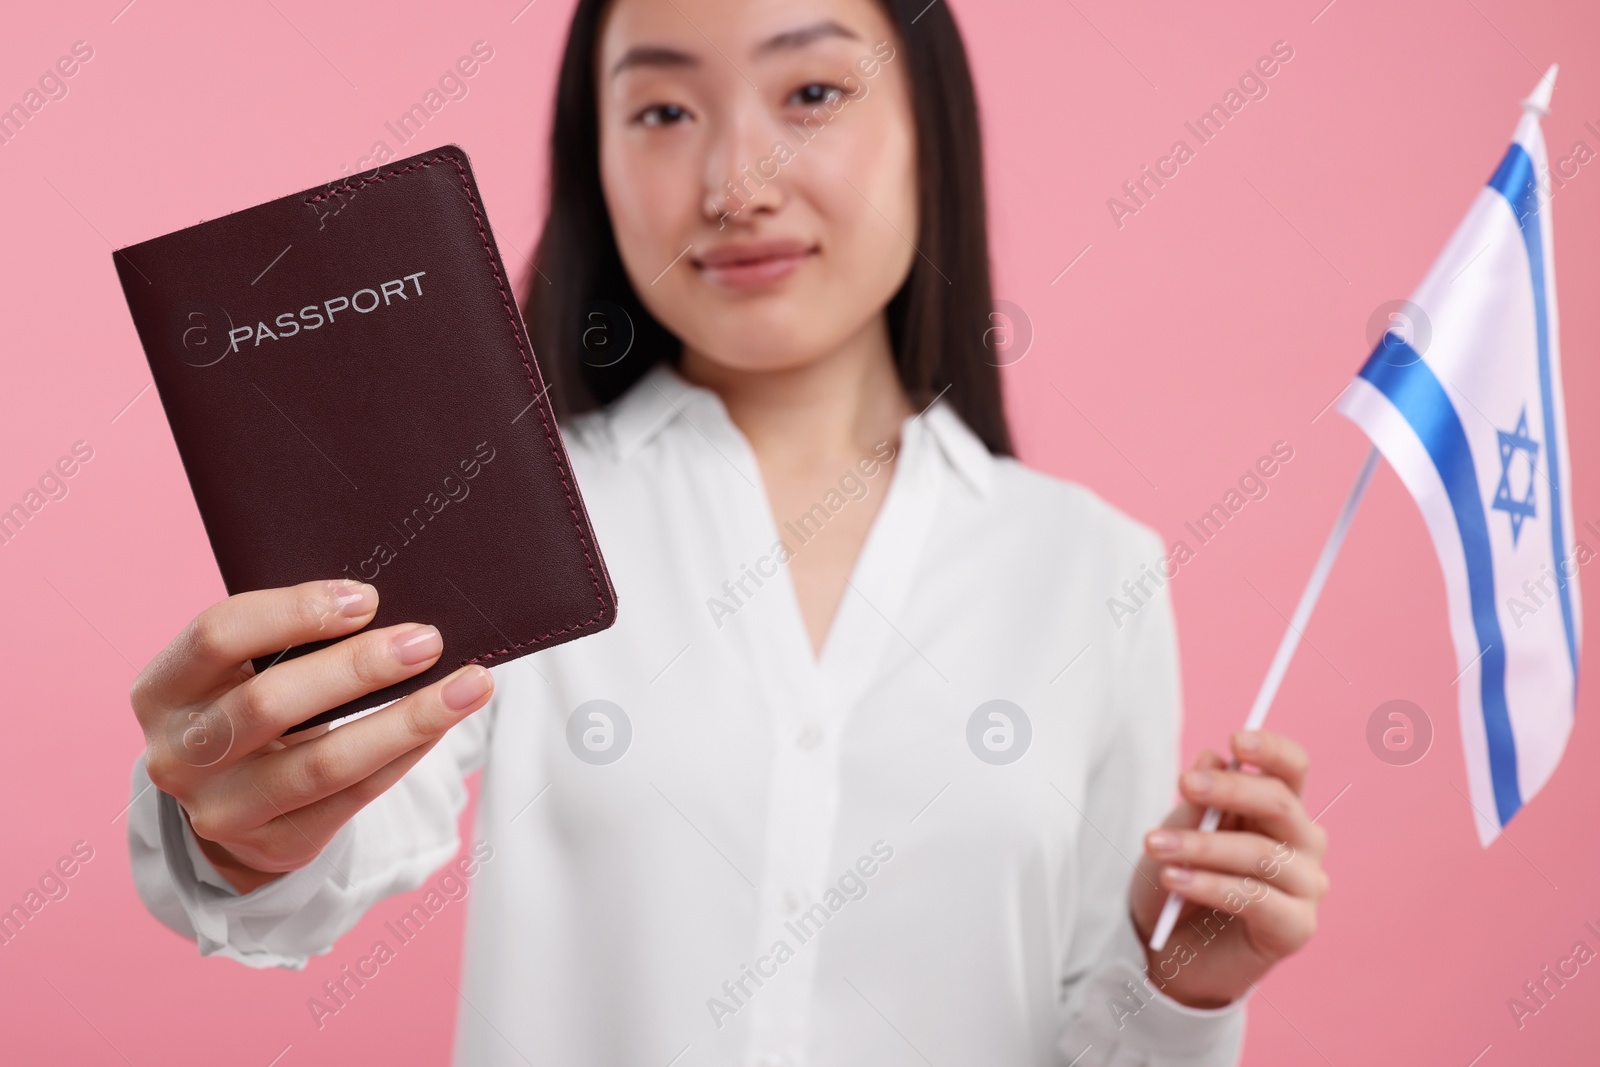 Photo of Immigration to Israel. Woman with passport and flag on pink background, selective focus